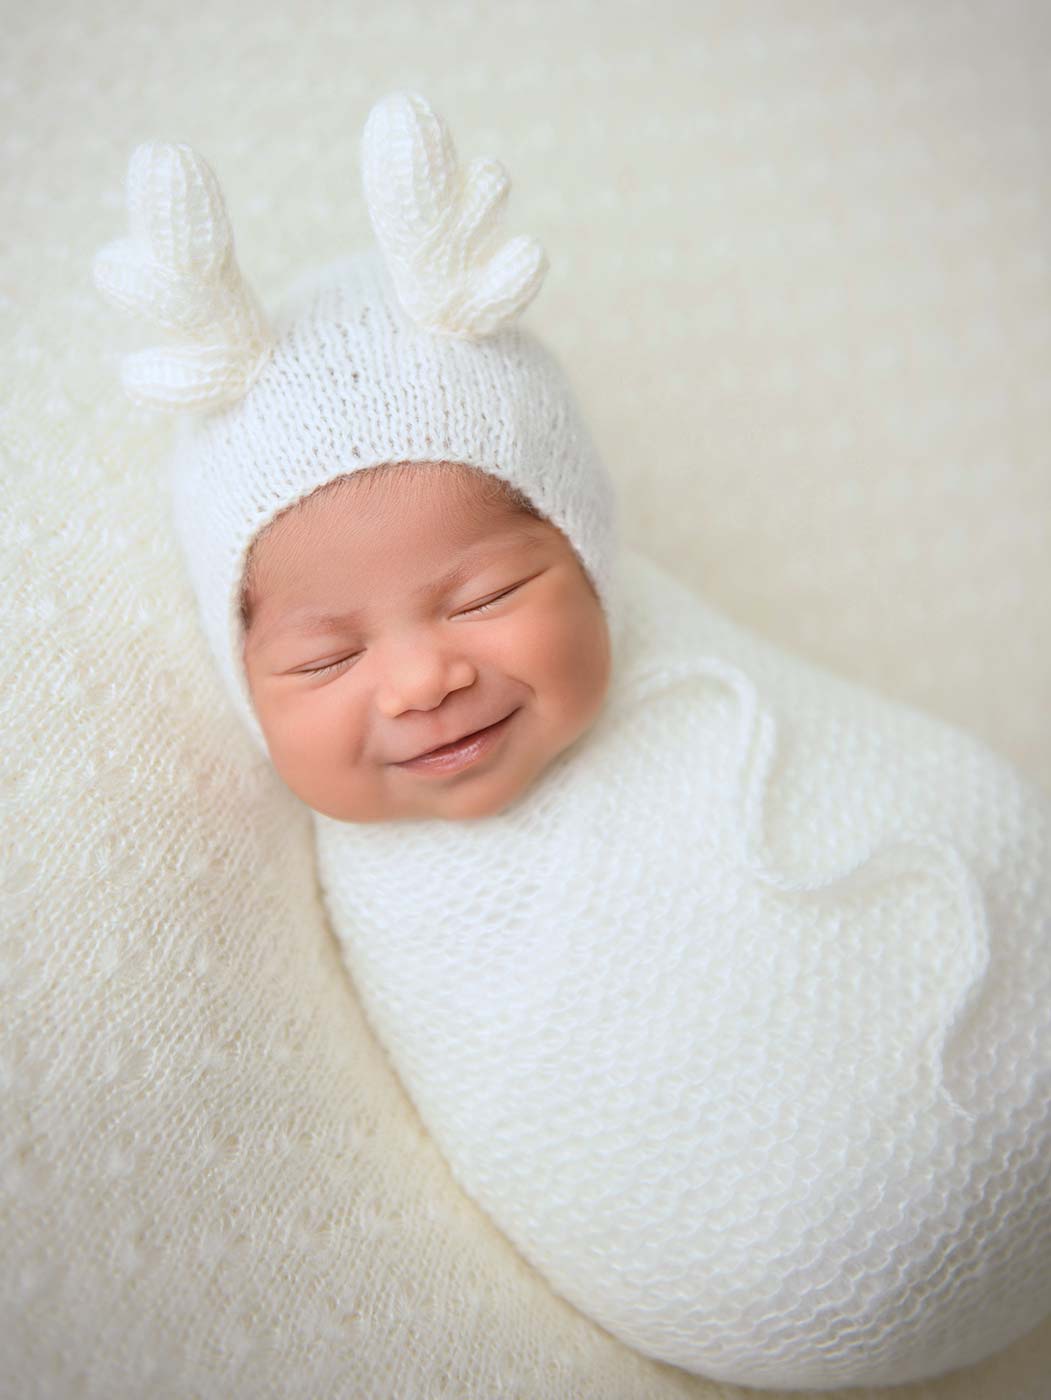 baby newborn with holiday reindeer antlers bonnet smiling